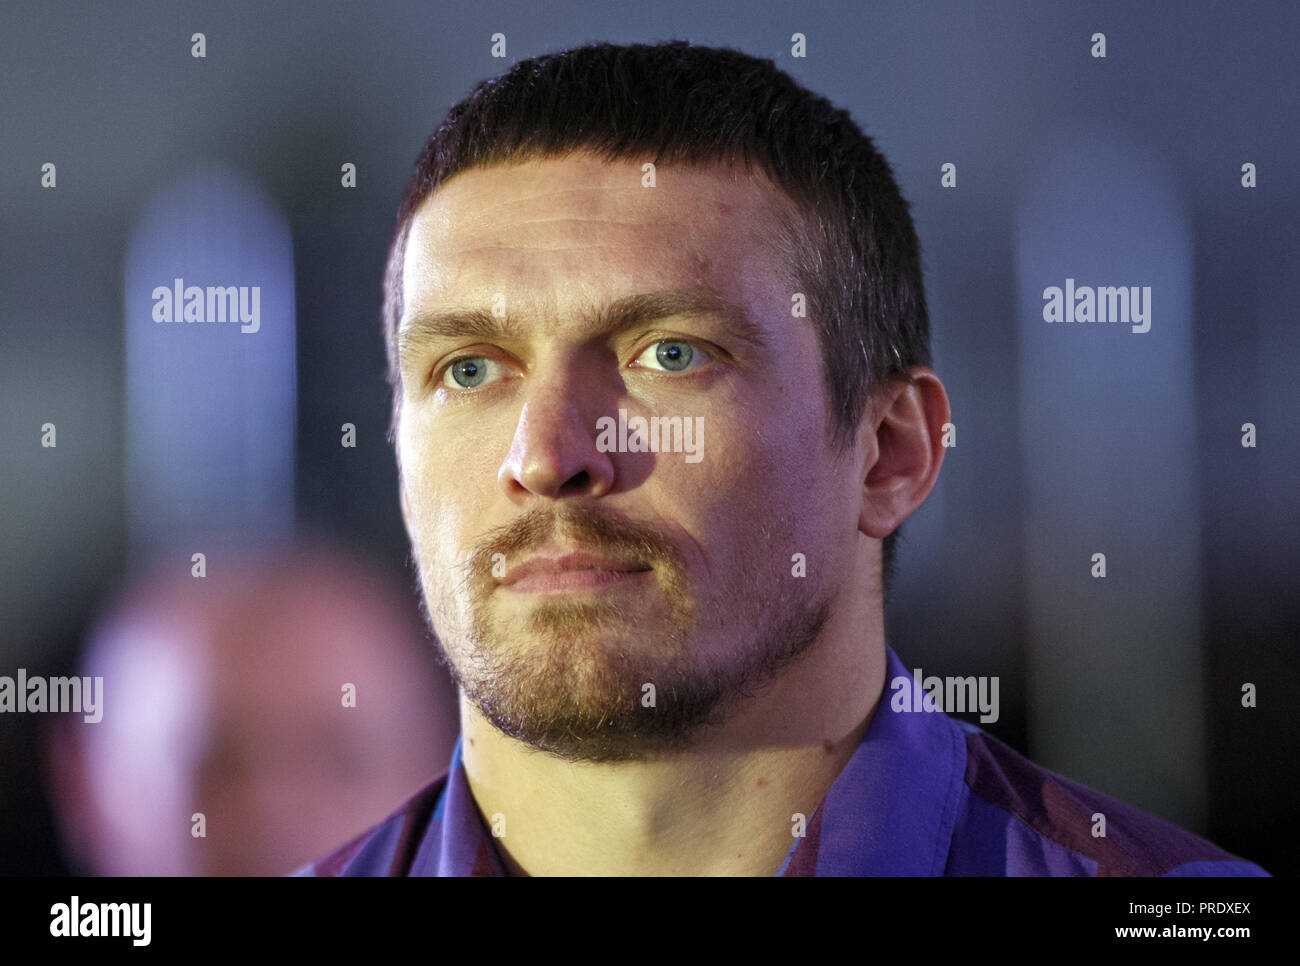 kiev-ukraine-1st-oct-2018-ukrainian-boxer-oleksandr-usyk-takes-part-at-the-opening-of-the-56th-world-boxing-convention-in-kiev-ukraine-on-1-october-2018-the-wbc-56th-congress-in-which-take-part-boxing-legends-evander-holyfield-lennox-lewis-eric-morales-and-about-700-participants-from-160-countries-runs-in-kiev-from-from-september-30-to-october-5-credit-serg-glovnyzuma-wirealamy-live-news-PRDXEX.jpg